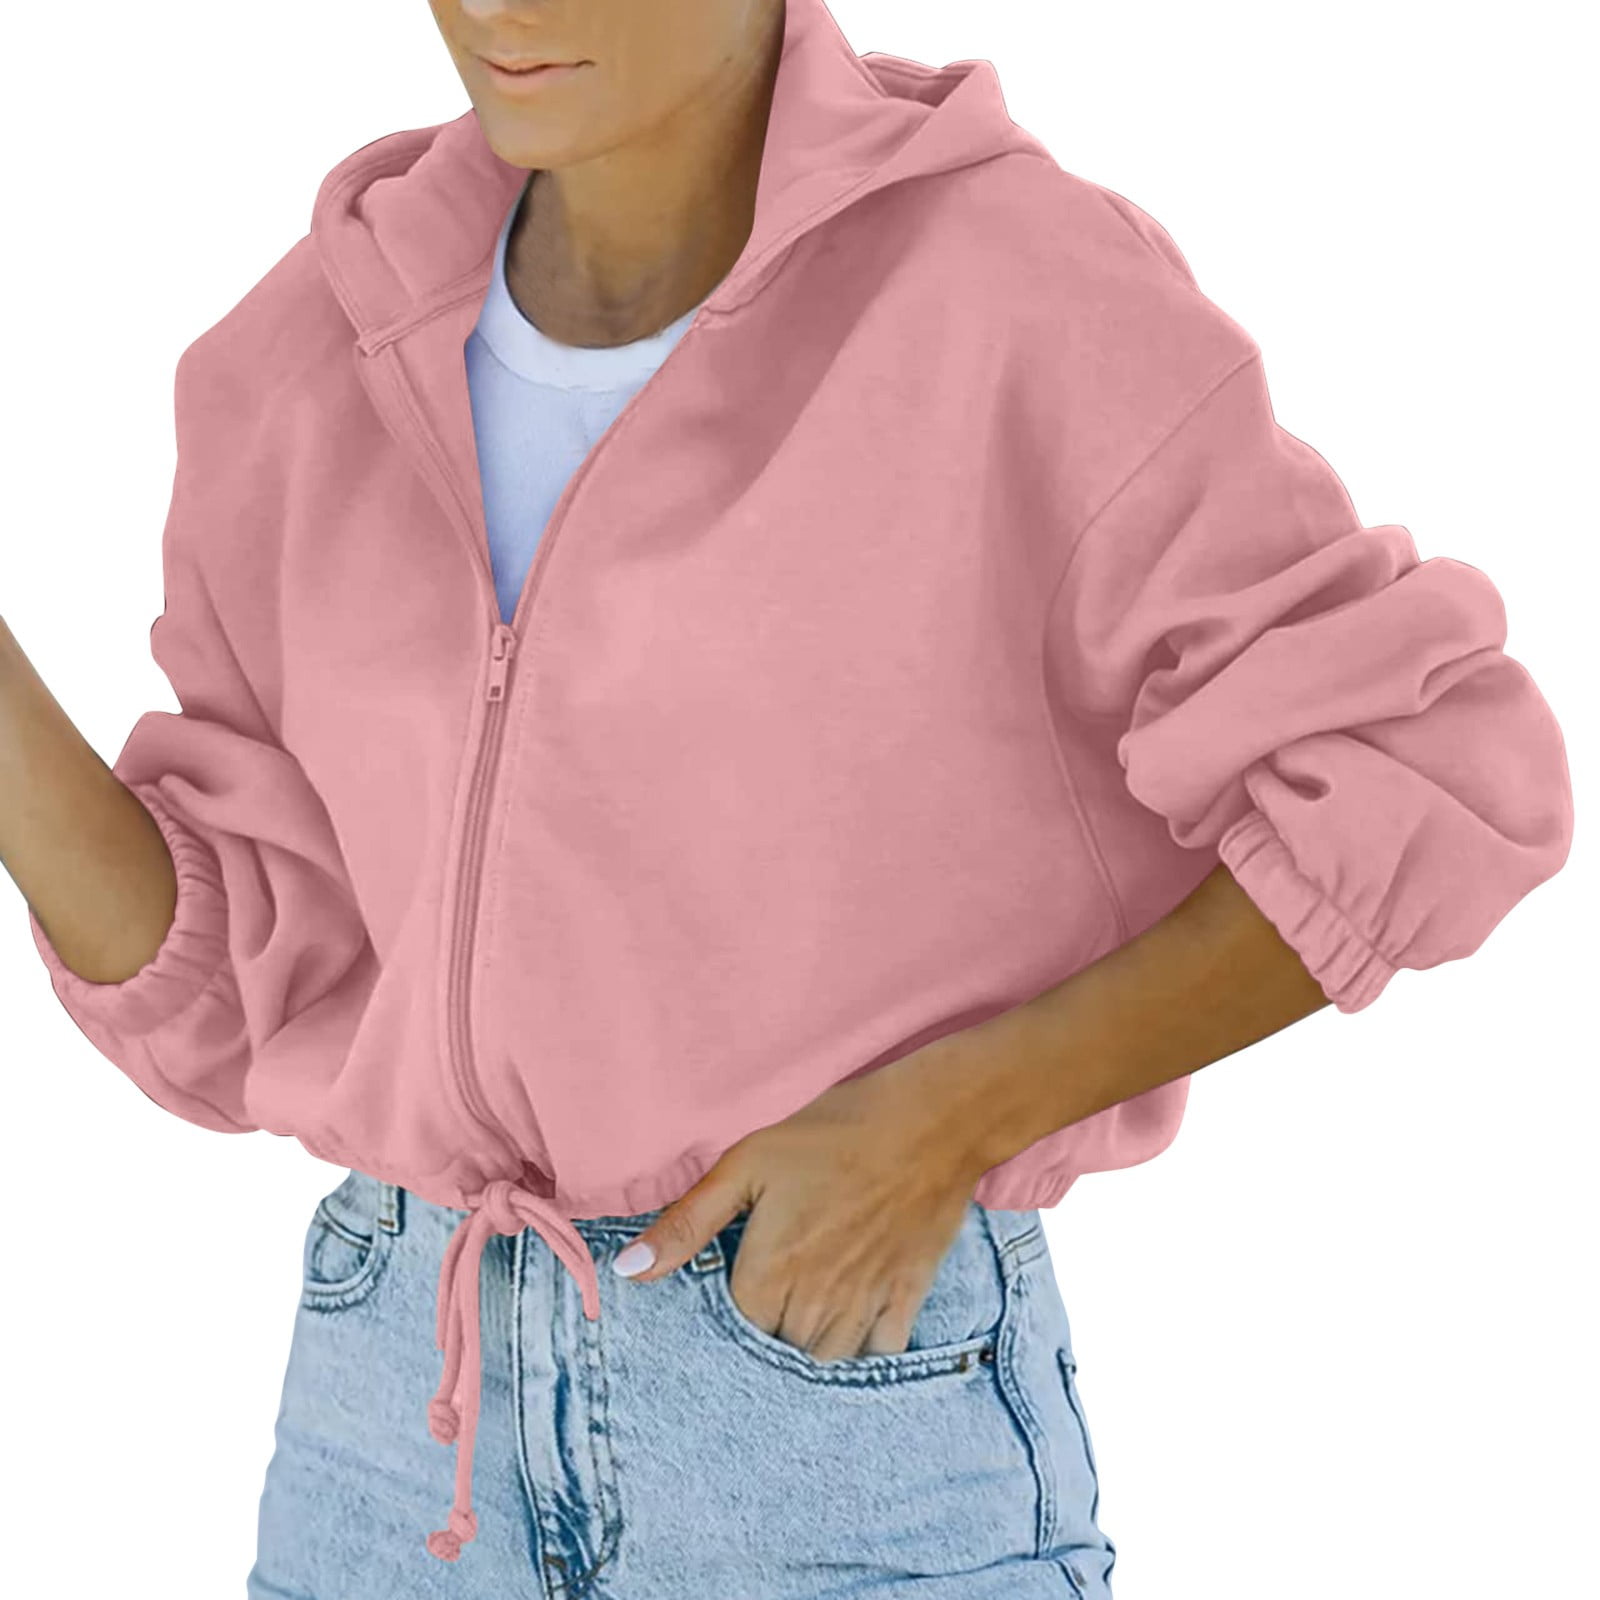 Daznico Jackets for Workout Hoodie Hooded Pink Women Sleeve Casual Up Zip Pullover Pullover XL Womens Long